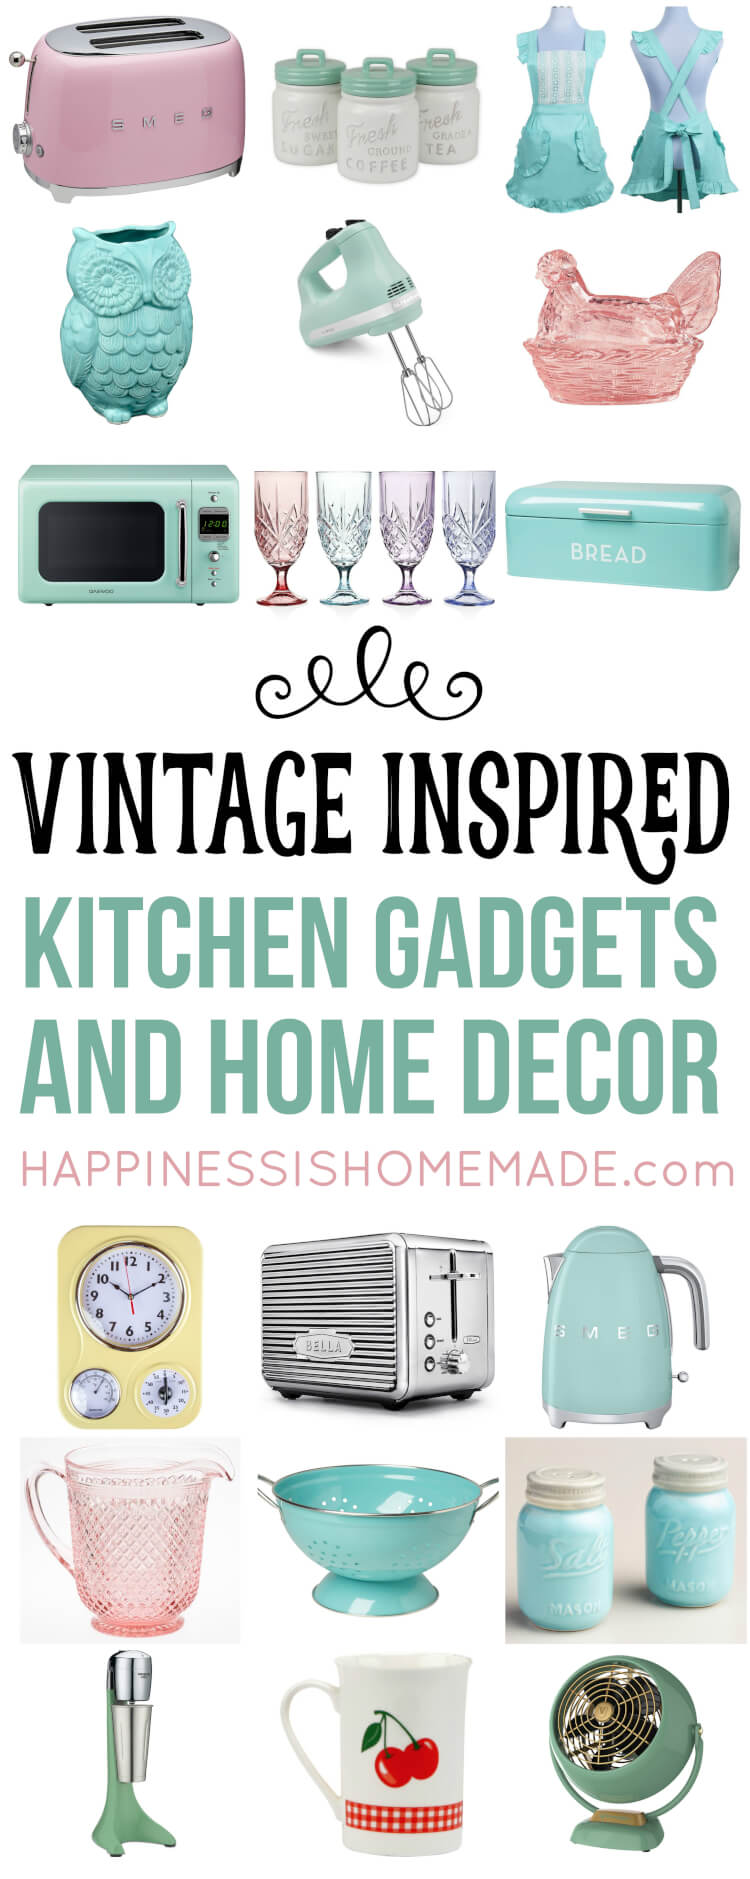 https://www.happinessishomemade.net/wp-content/uploads/2017/01/Vintage-Inspired-Kitchen-Gadgets-and-Home-Decor.jpg